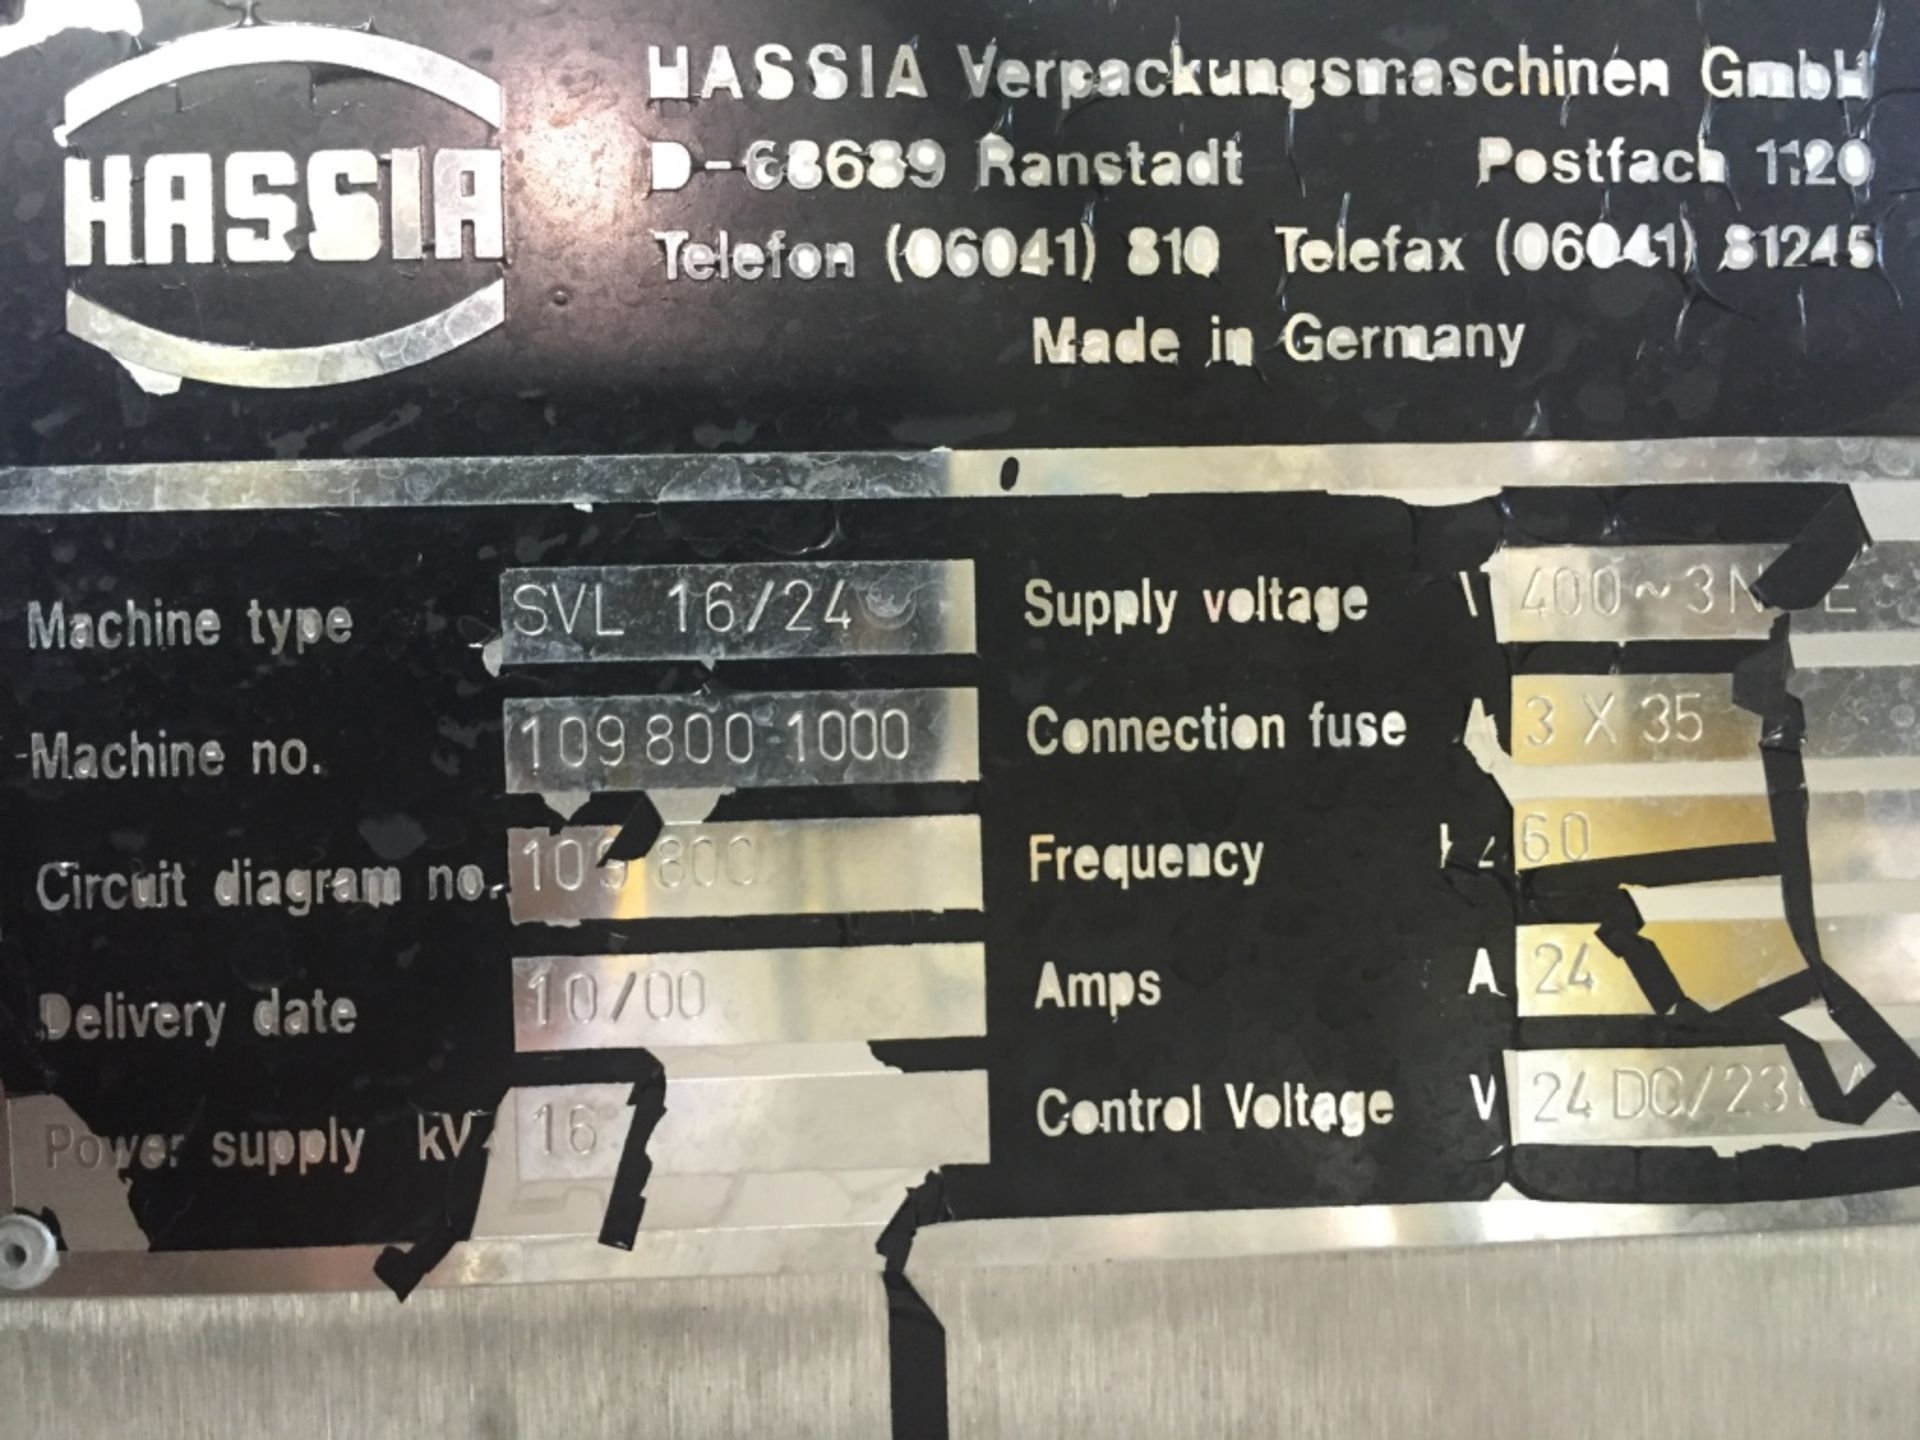 Hassia StickPack VFFS. Model SVL 16/24, Serial 109800-1000 (Located in New York) Loading Included in - Image 10 of 10